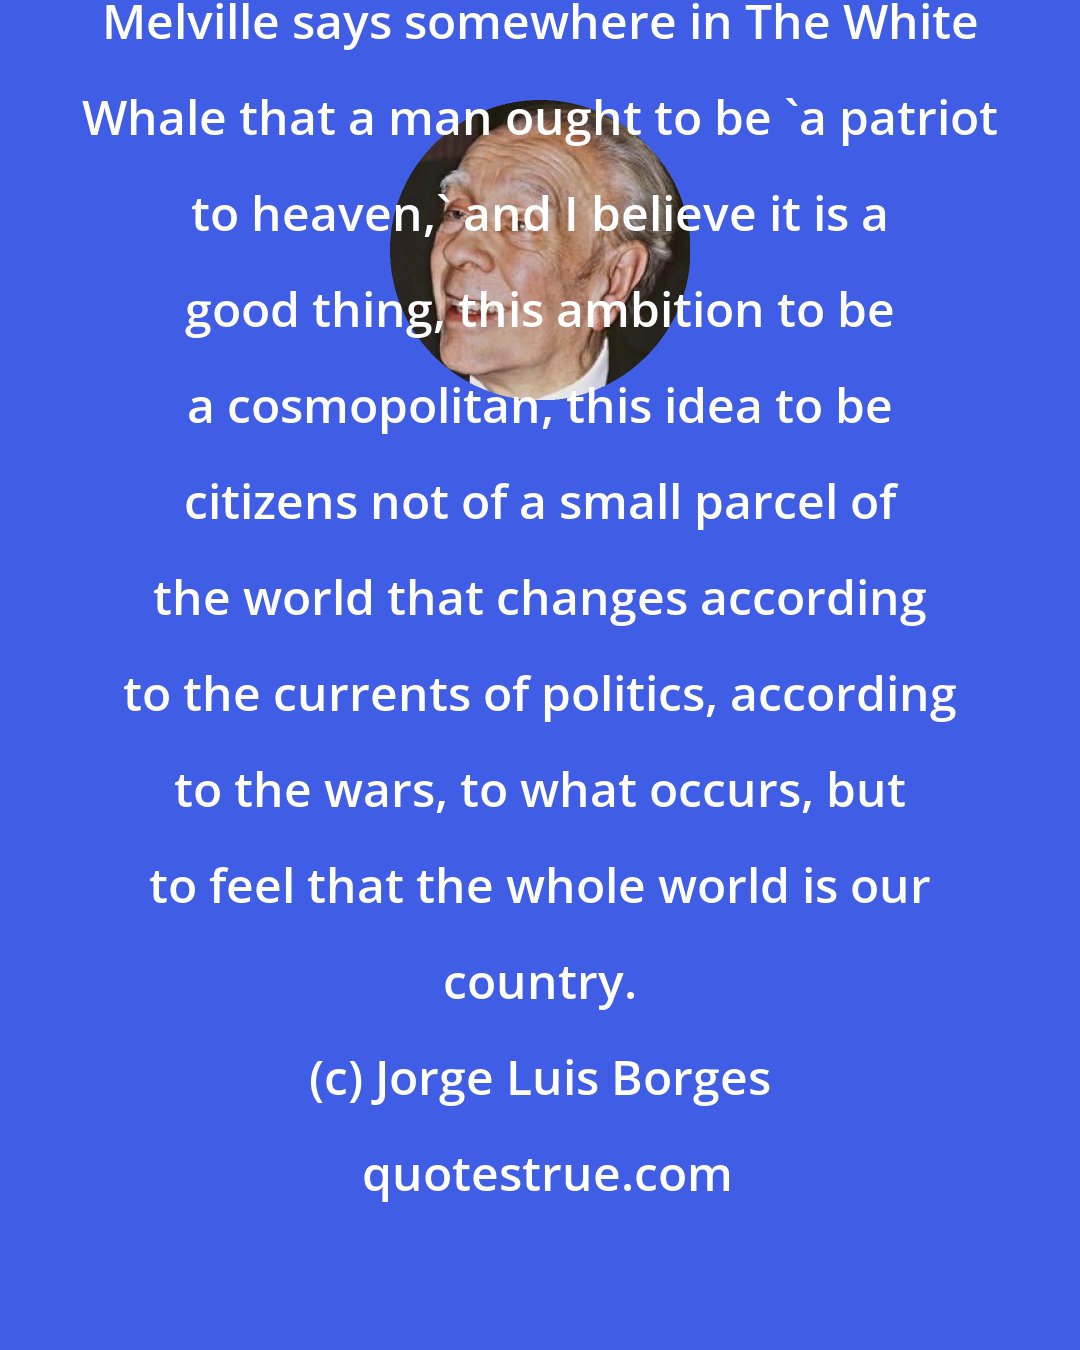 Jorge Luis Borges: The great American writer Herman Melville says somewhere in The White Whale that a man ought to be 'a patriot to heaven,' and I believe it is a good thing, this ambition to be a cosmopolitan, this idea to be citizens not of a small parcel of the world that changes according to the currents of politics, according to the wars, to what occurs, but to feel that the whole world is our country.